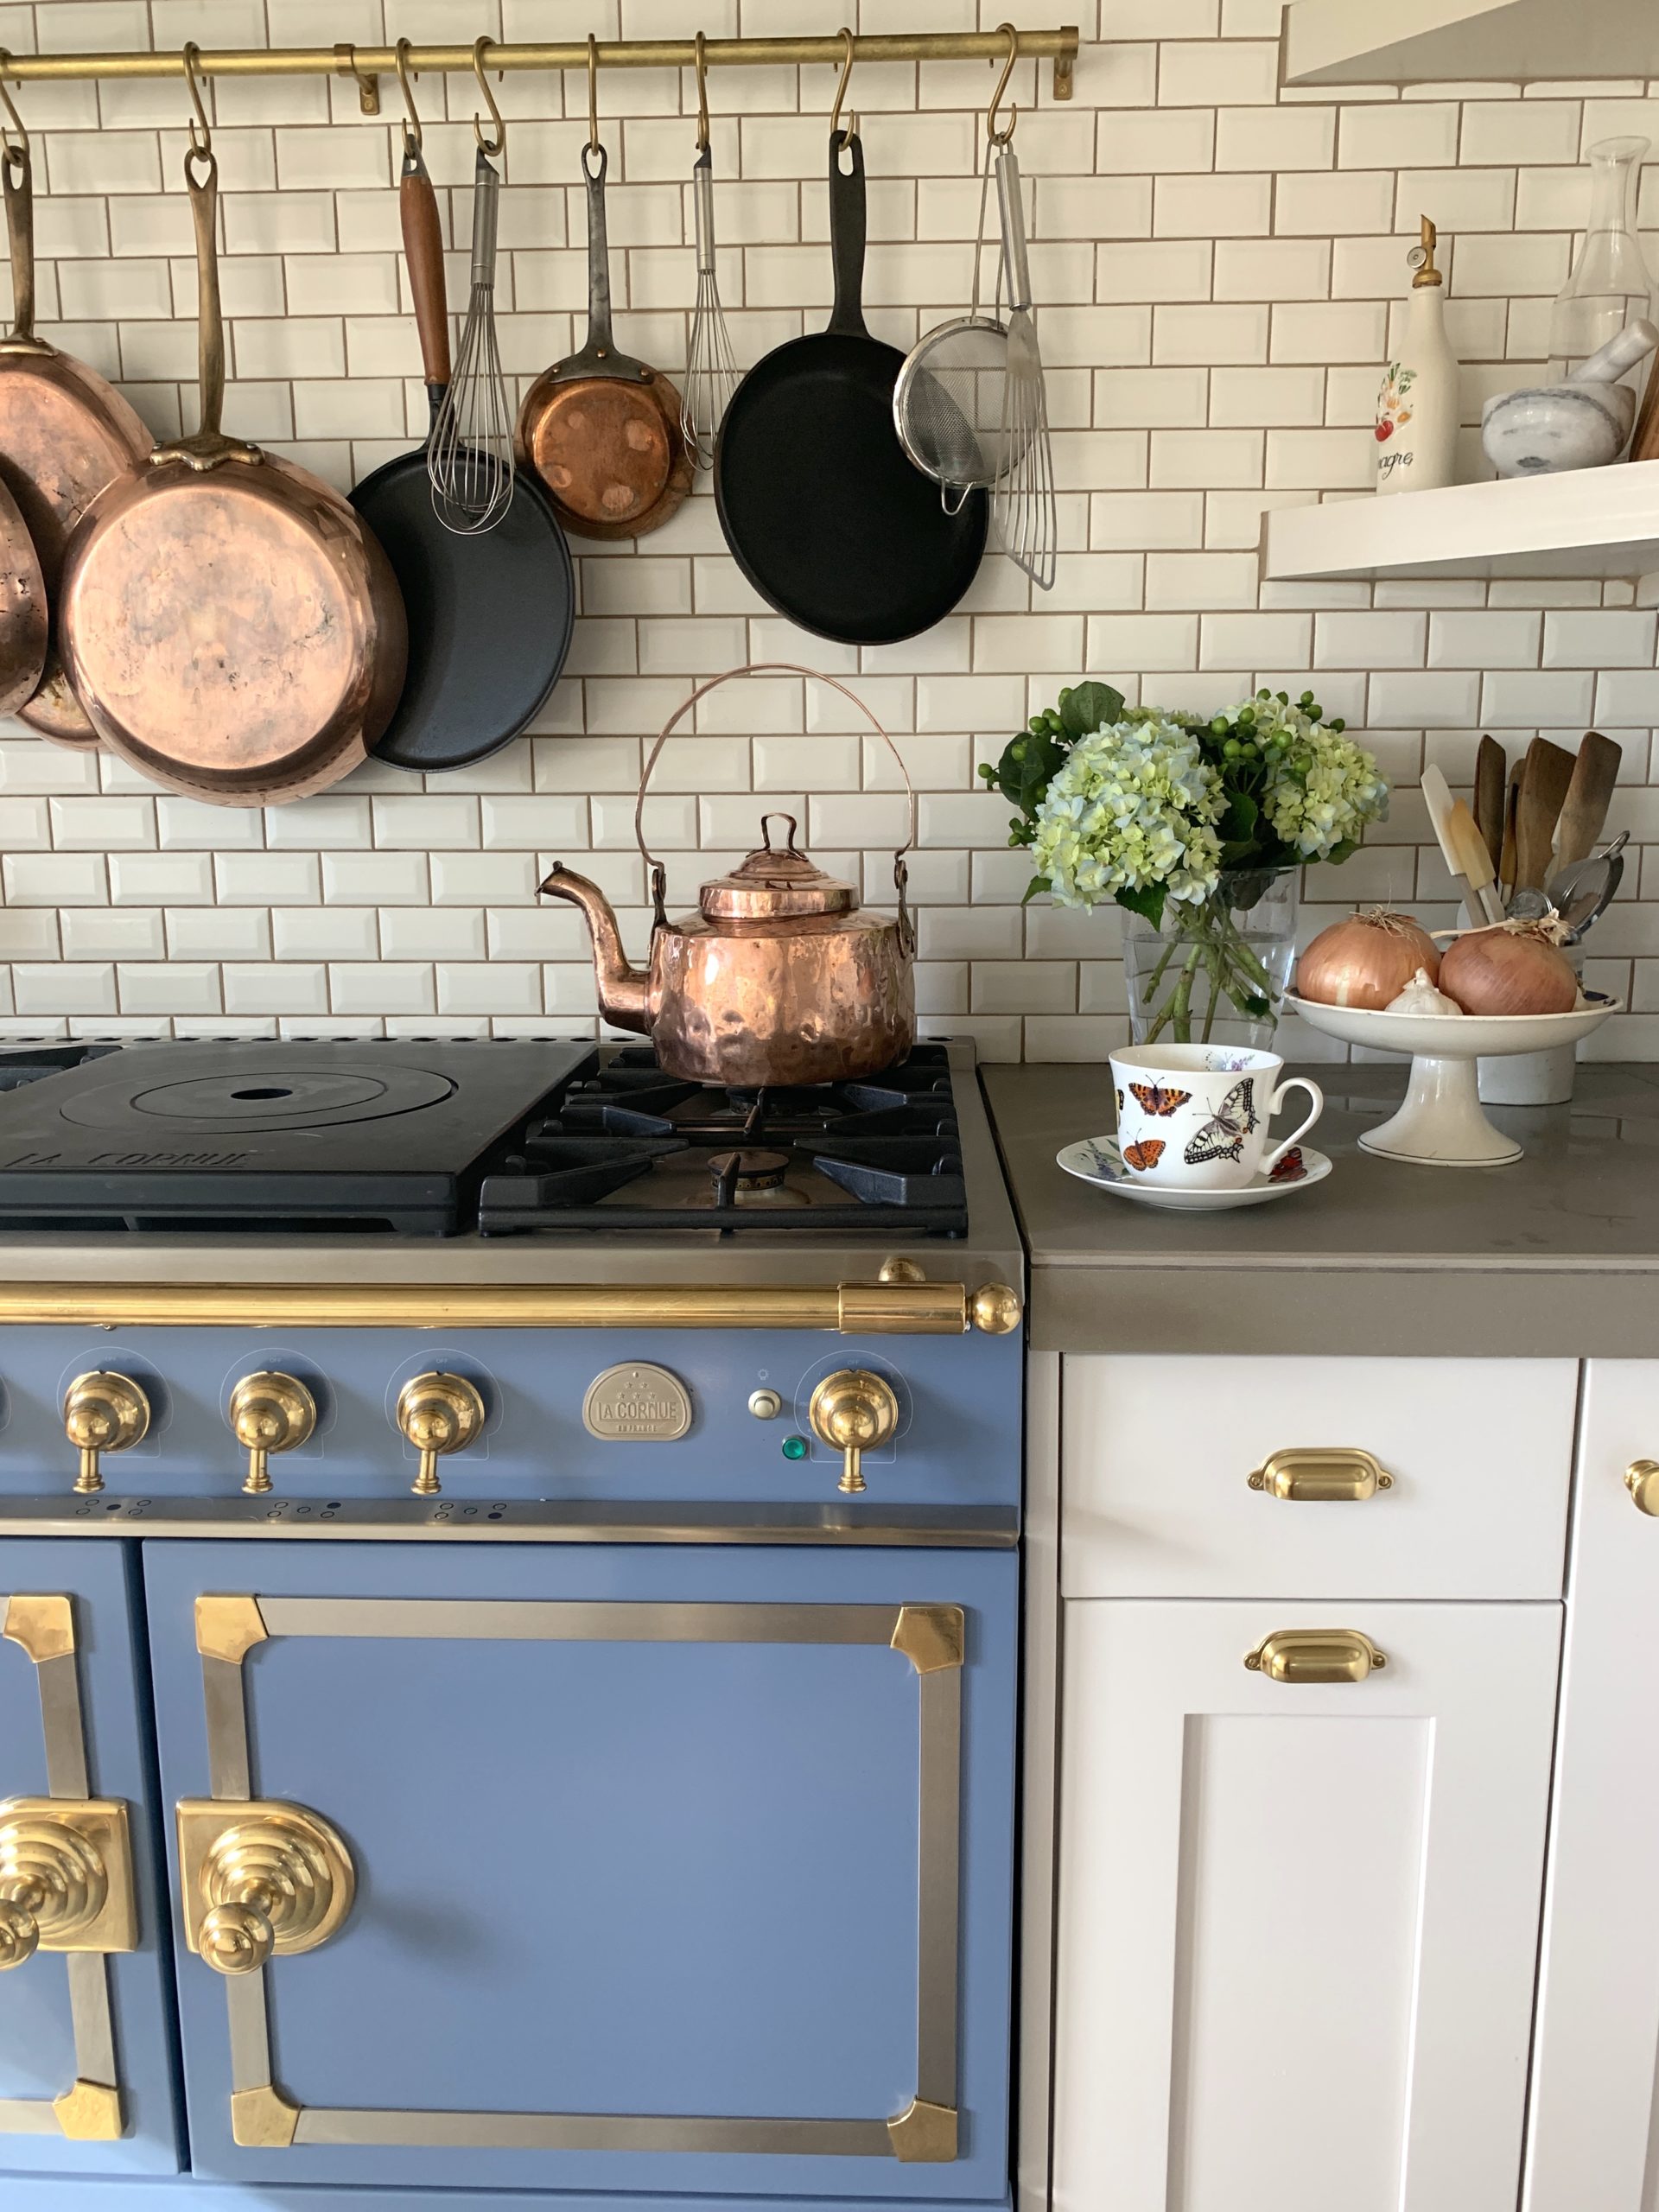 La Cornue: Why This French Stove Is the Best Fit For My Kitchen and Life